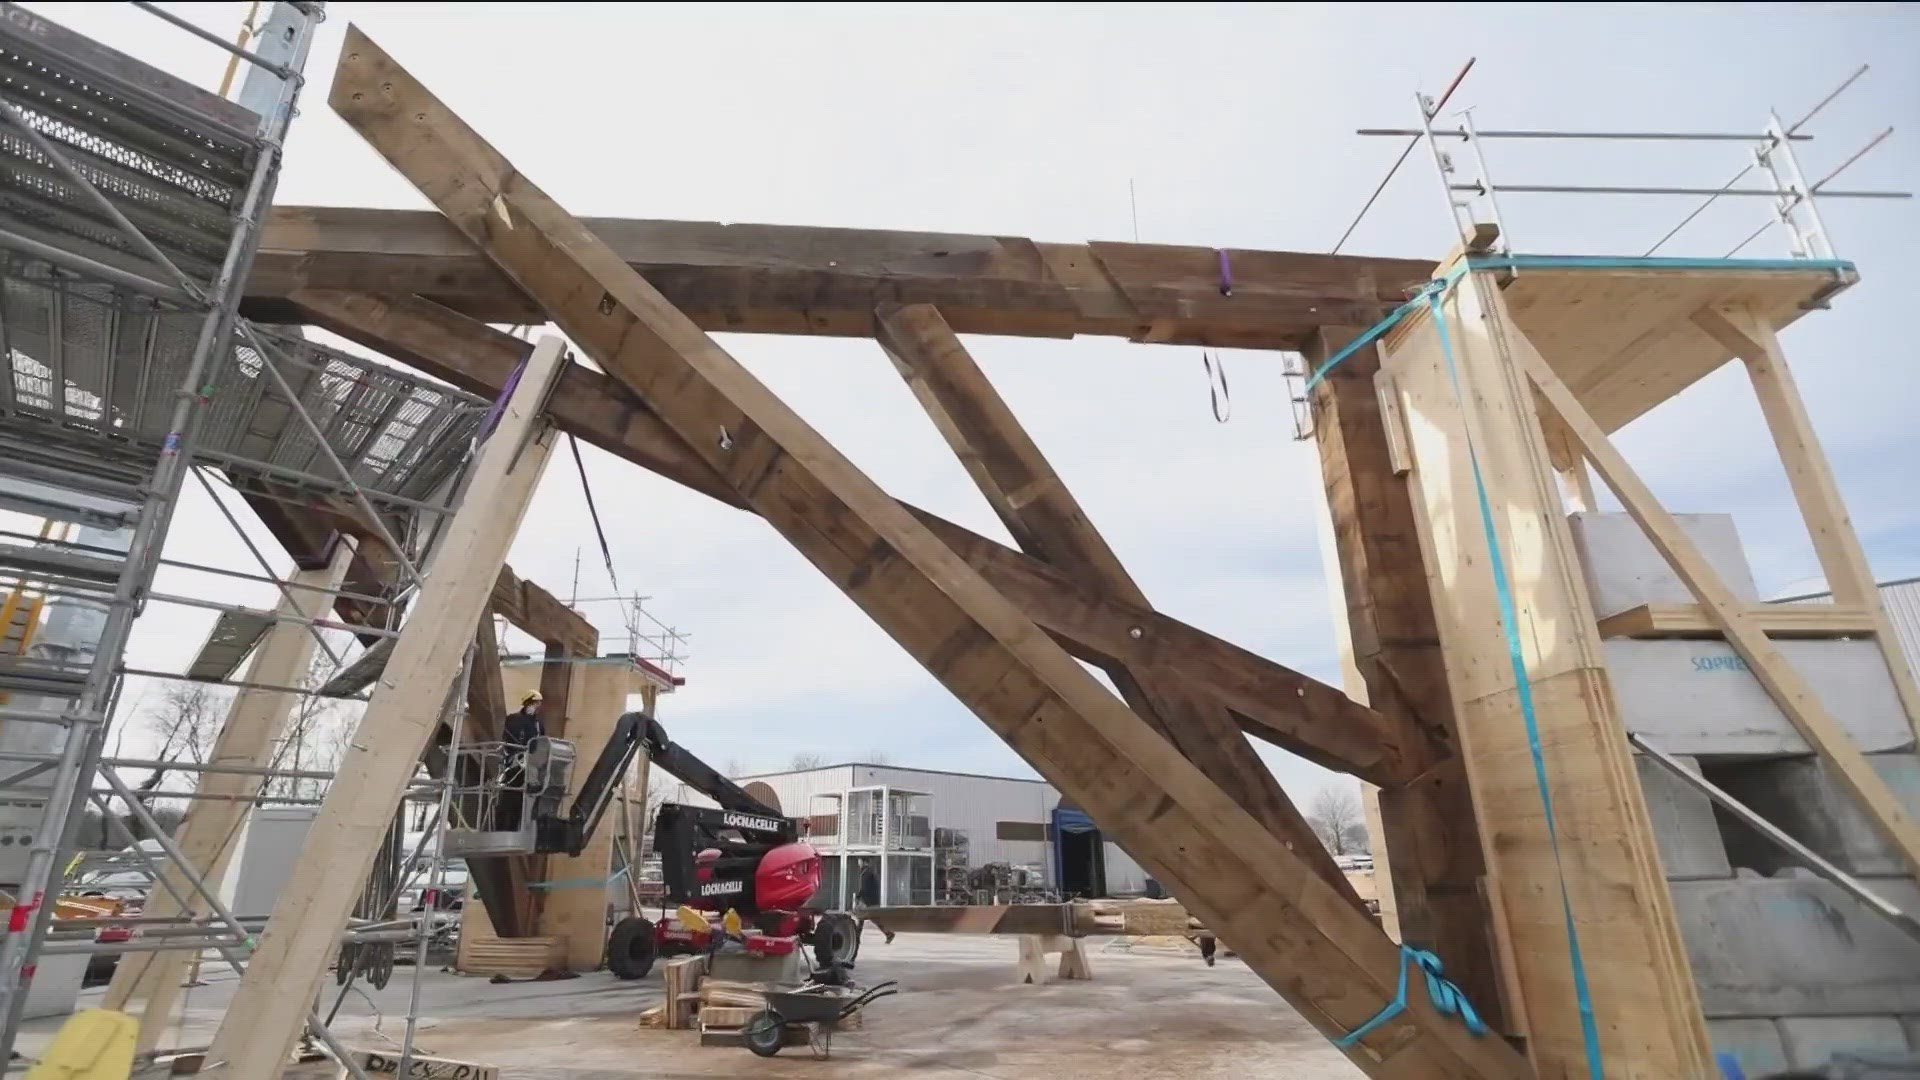 An 86,000-square-foot warehouse in northeastern France was built for the purpose of rafting Notre Dame's wooden spire. The first layer is nearly done.